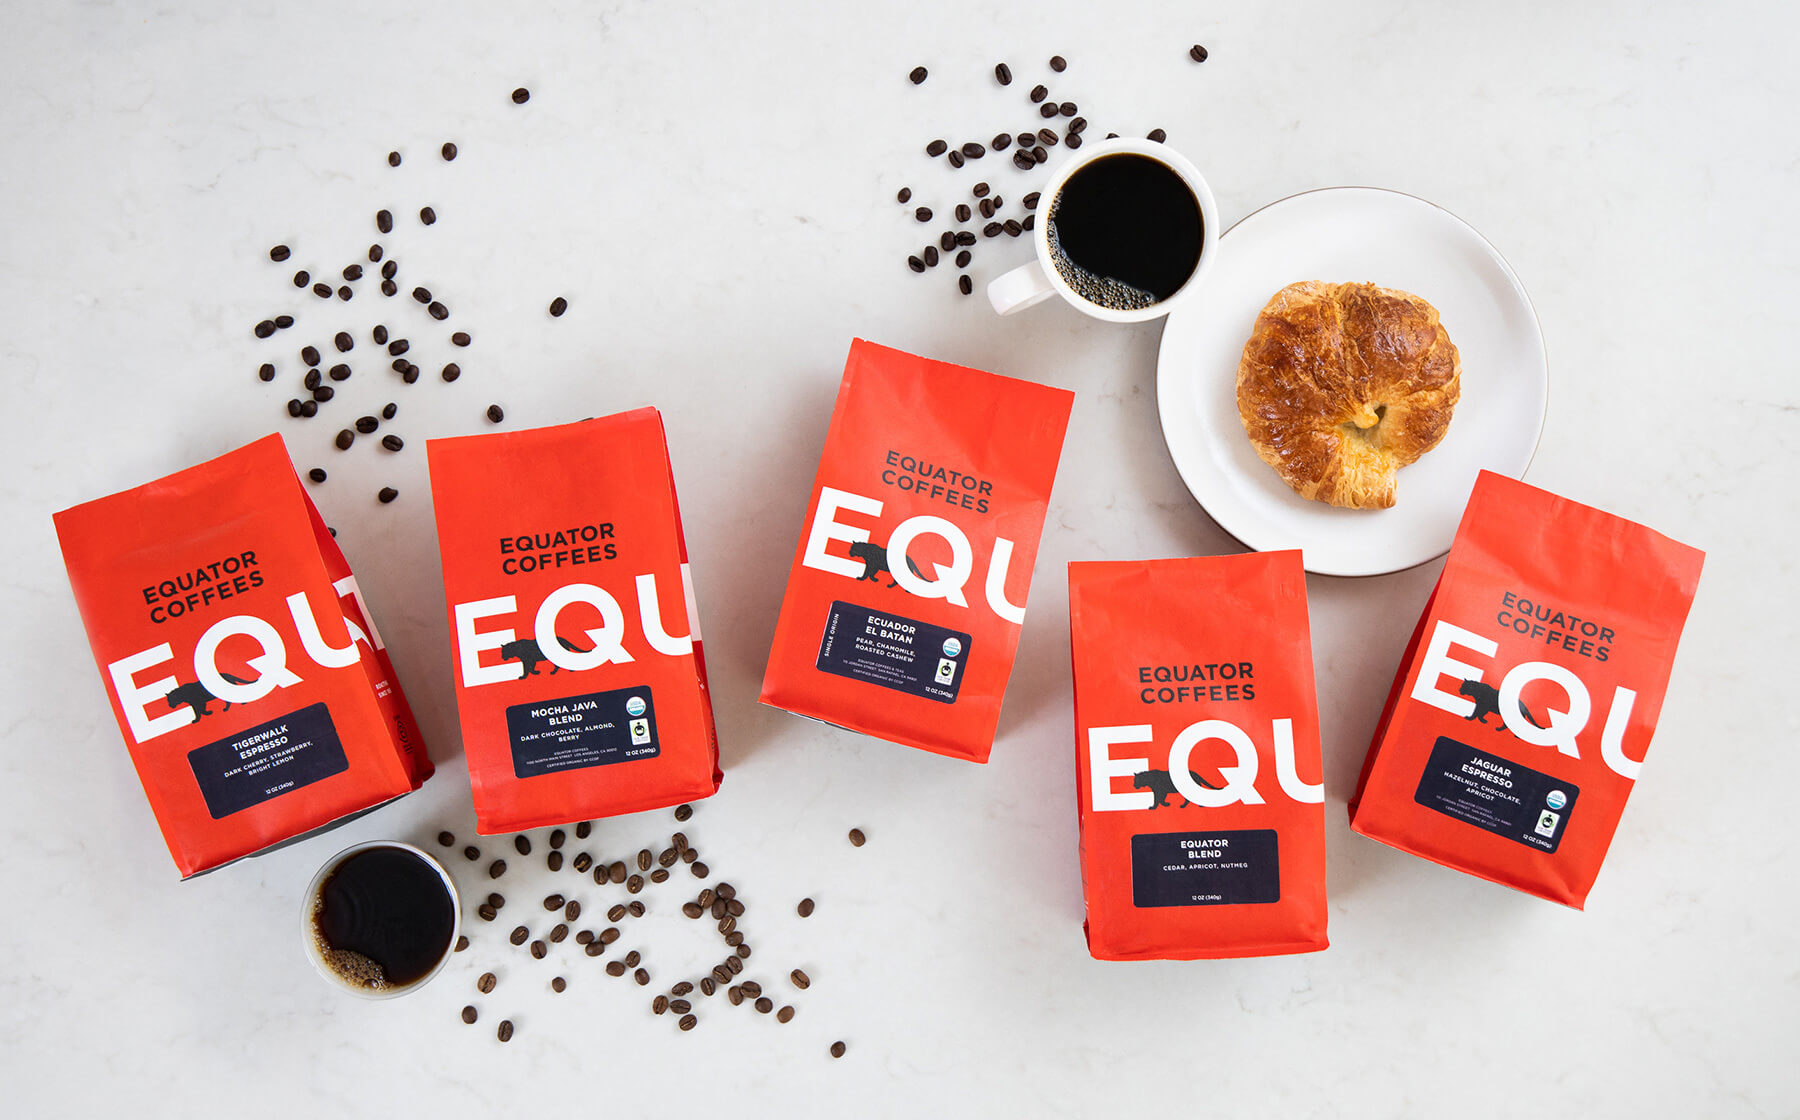 Find out how Equator Coffees achieved 372% subscription growth by switching to Ordergroove